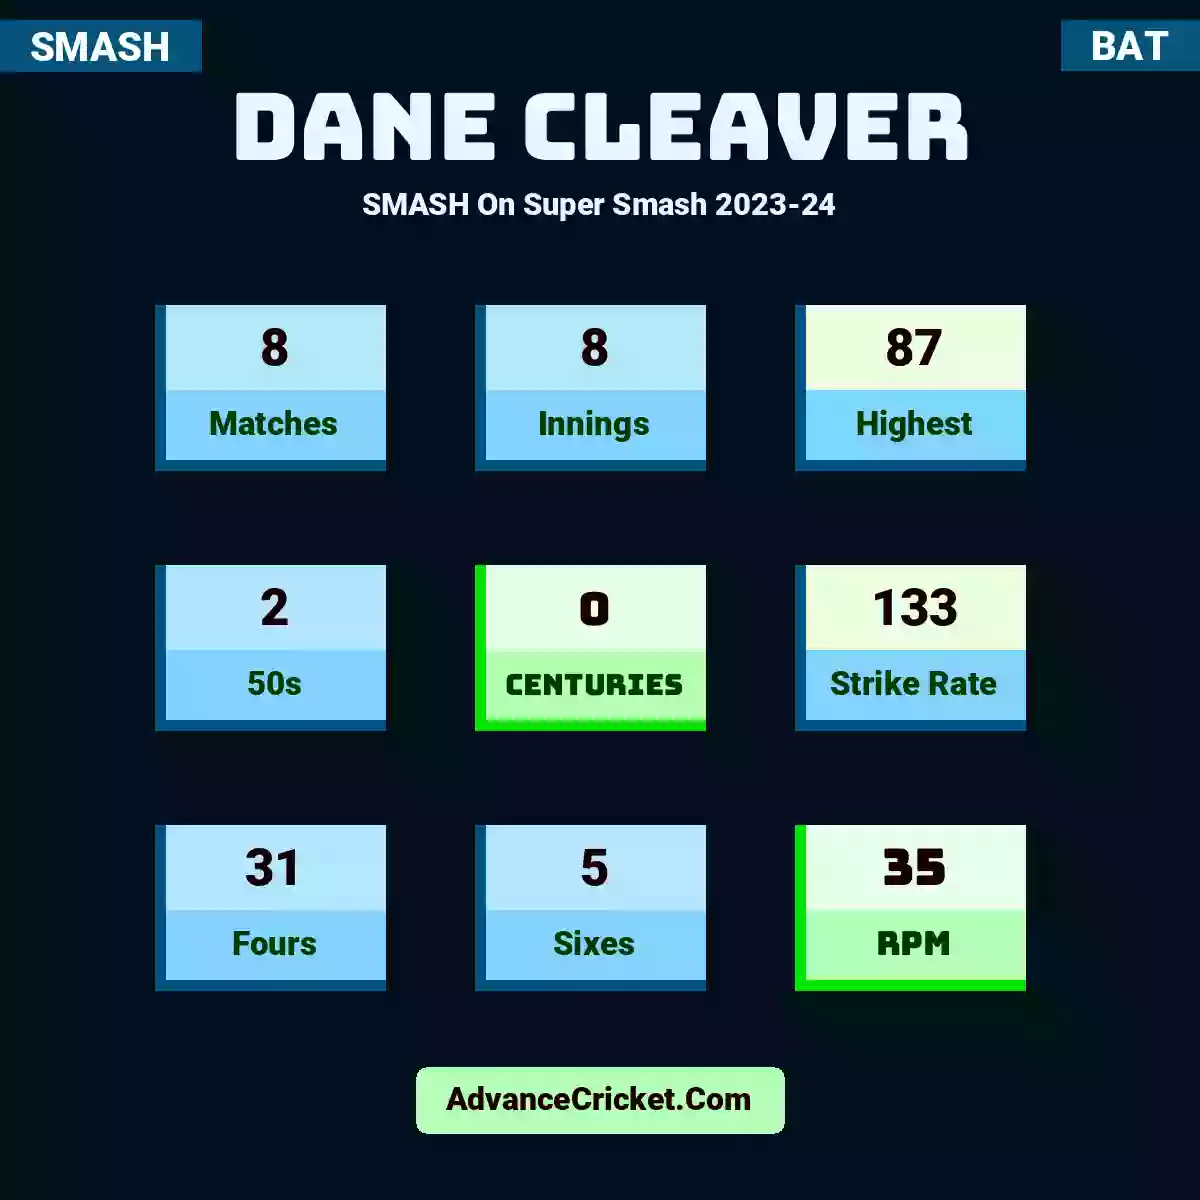 Dane Cleaver SMASH  On Super Smash 2023-24, Dane Cleaver played 8 matches, scored 87 runs as highest, 2 half-centuries, and 0 centuries, with a strike rate of 133. D.Cleaver hit 31 fours and 5 sixes, with an RPM of 35.